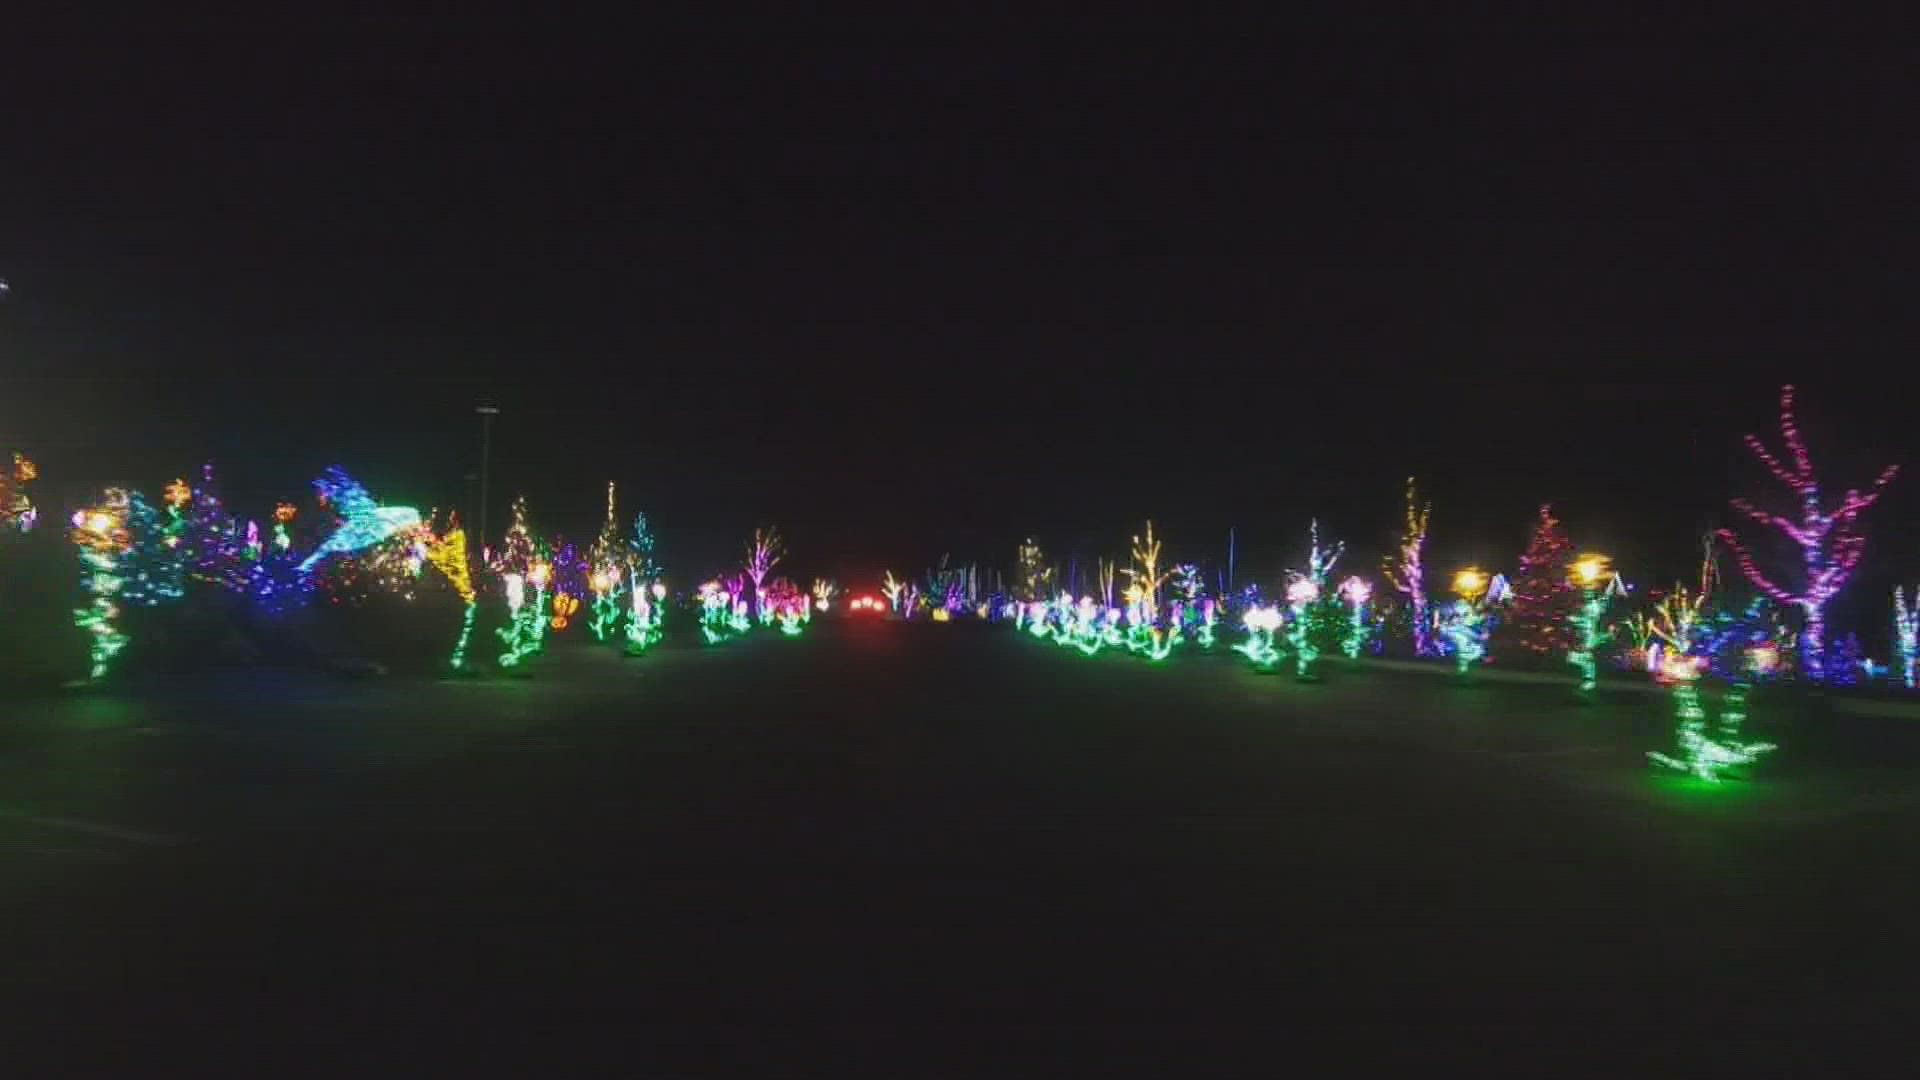 This year's display includes 650,000 LED lights and will be a driving experience.